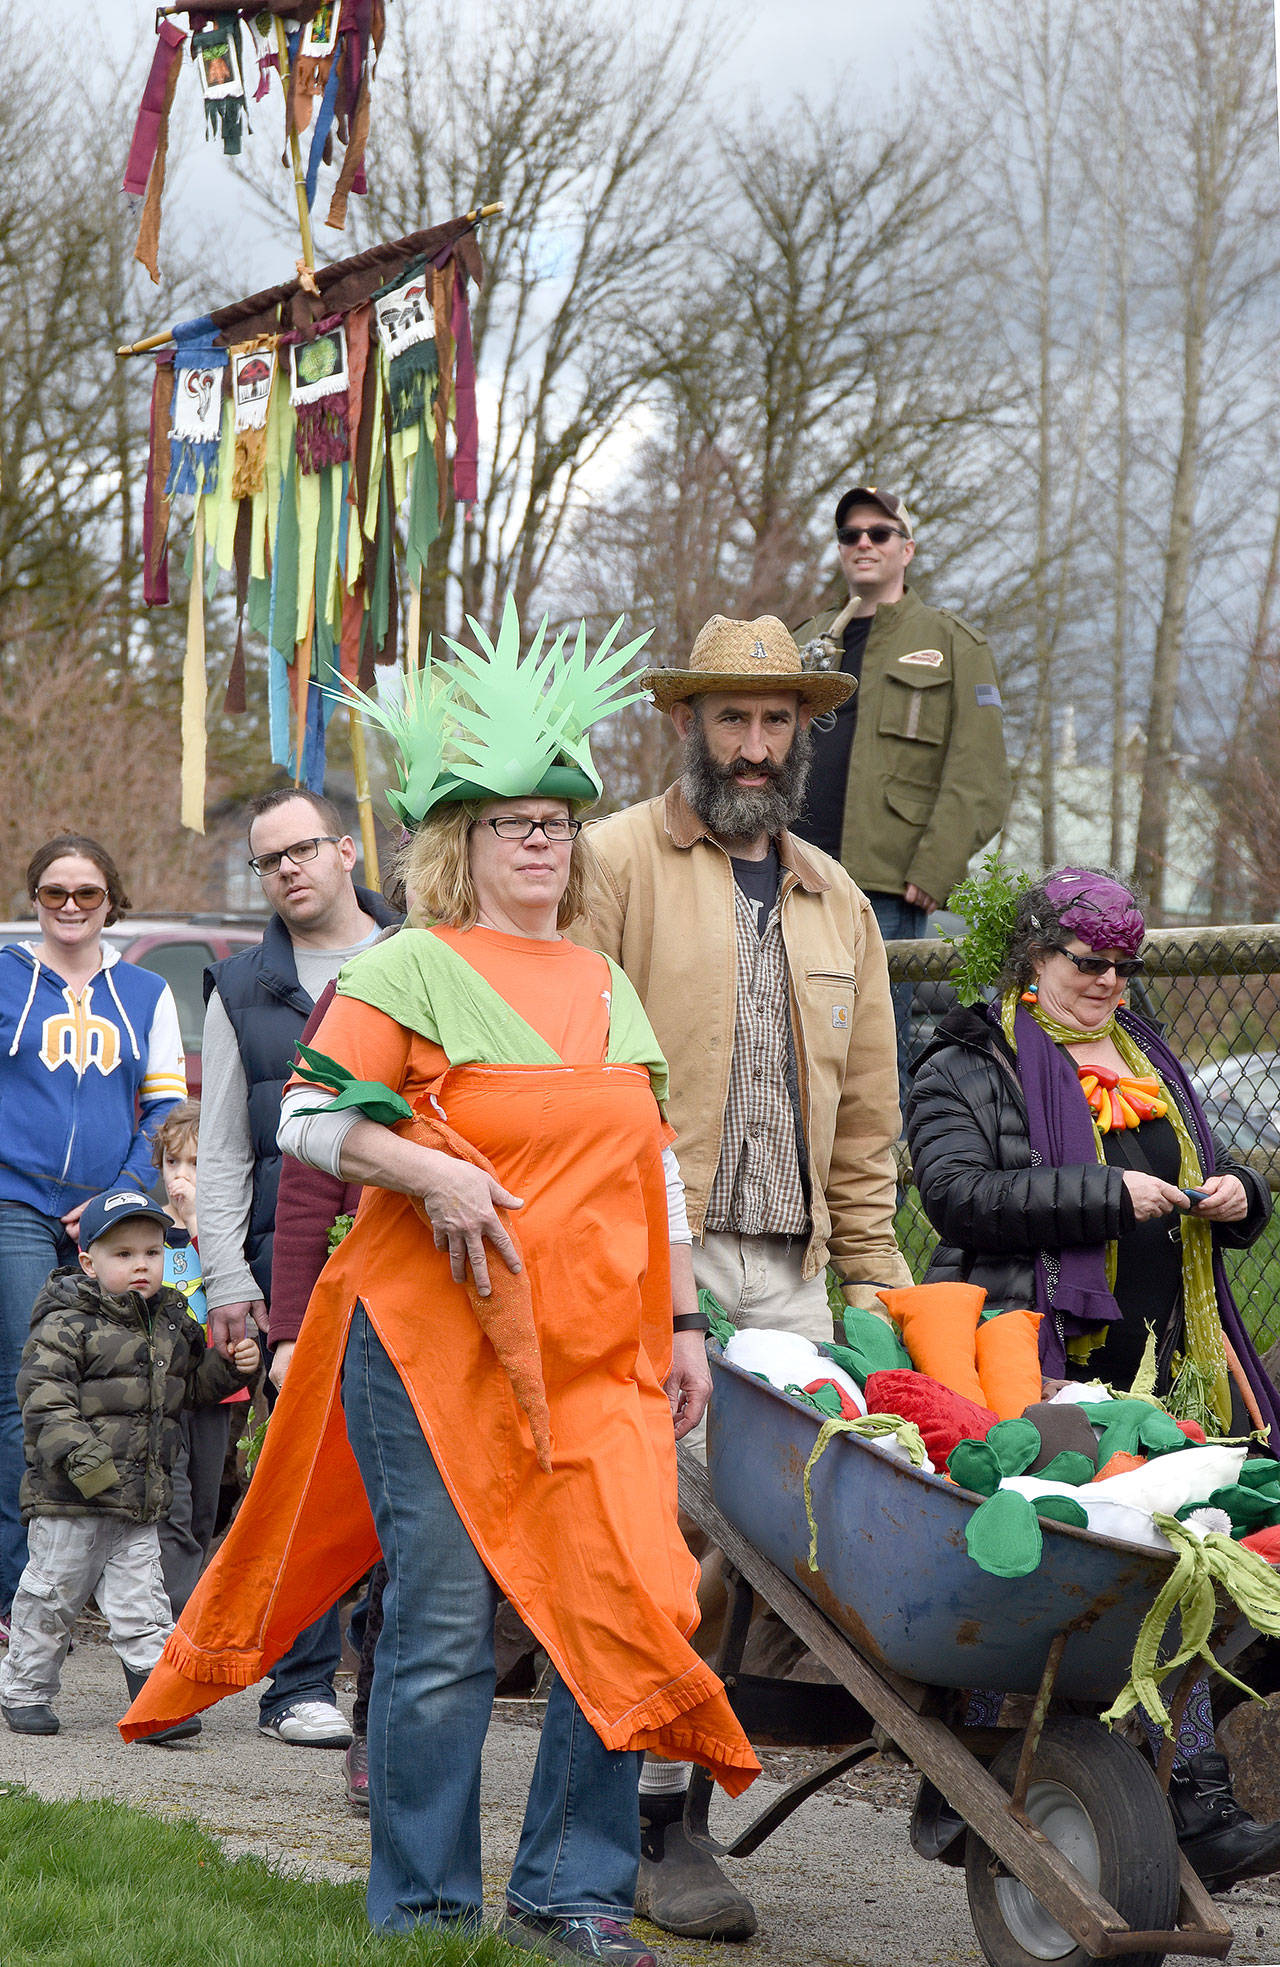 Vegetables and farmers alike marched into Duvall’s Depot Park to conclude the 2017March of the Vegetables parade. This year’s parade is set for Saturday, March 24. Visit &lt;a href="http://www.marchofthevegetables.org" target="_blank"&gt;www.marchofthevegetables.org&lt;/a&gt; for more information. (File Photo)